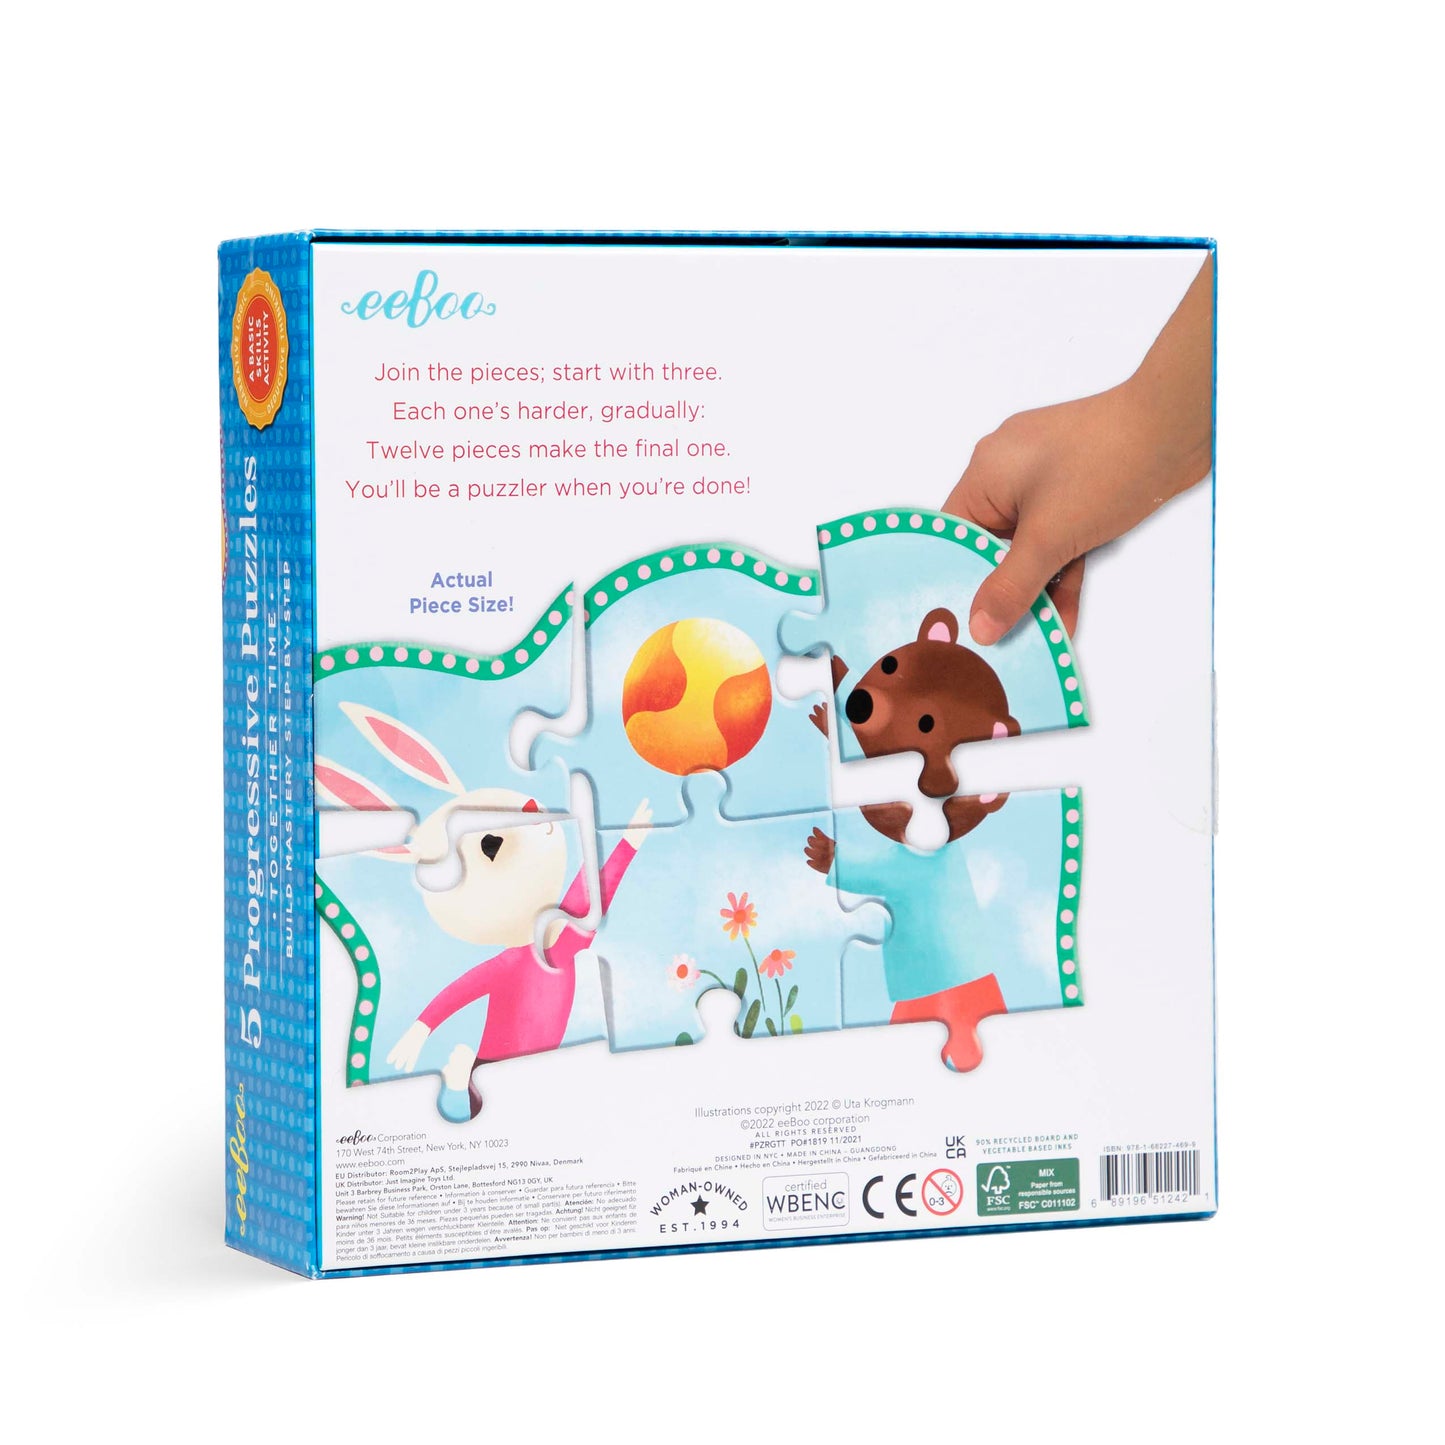 Ready to Grow - Together Time - Includes Five Progressive Puzzles | eeBoo Wonderful Gift for Kids 3+